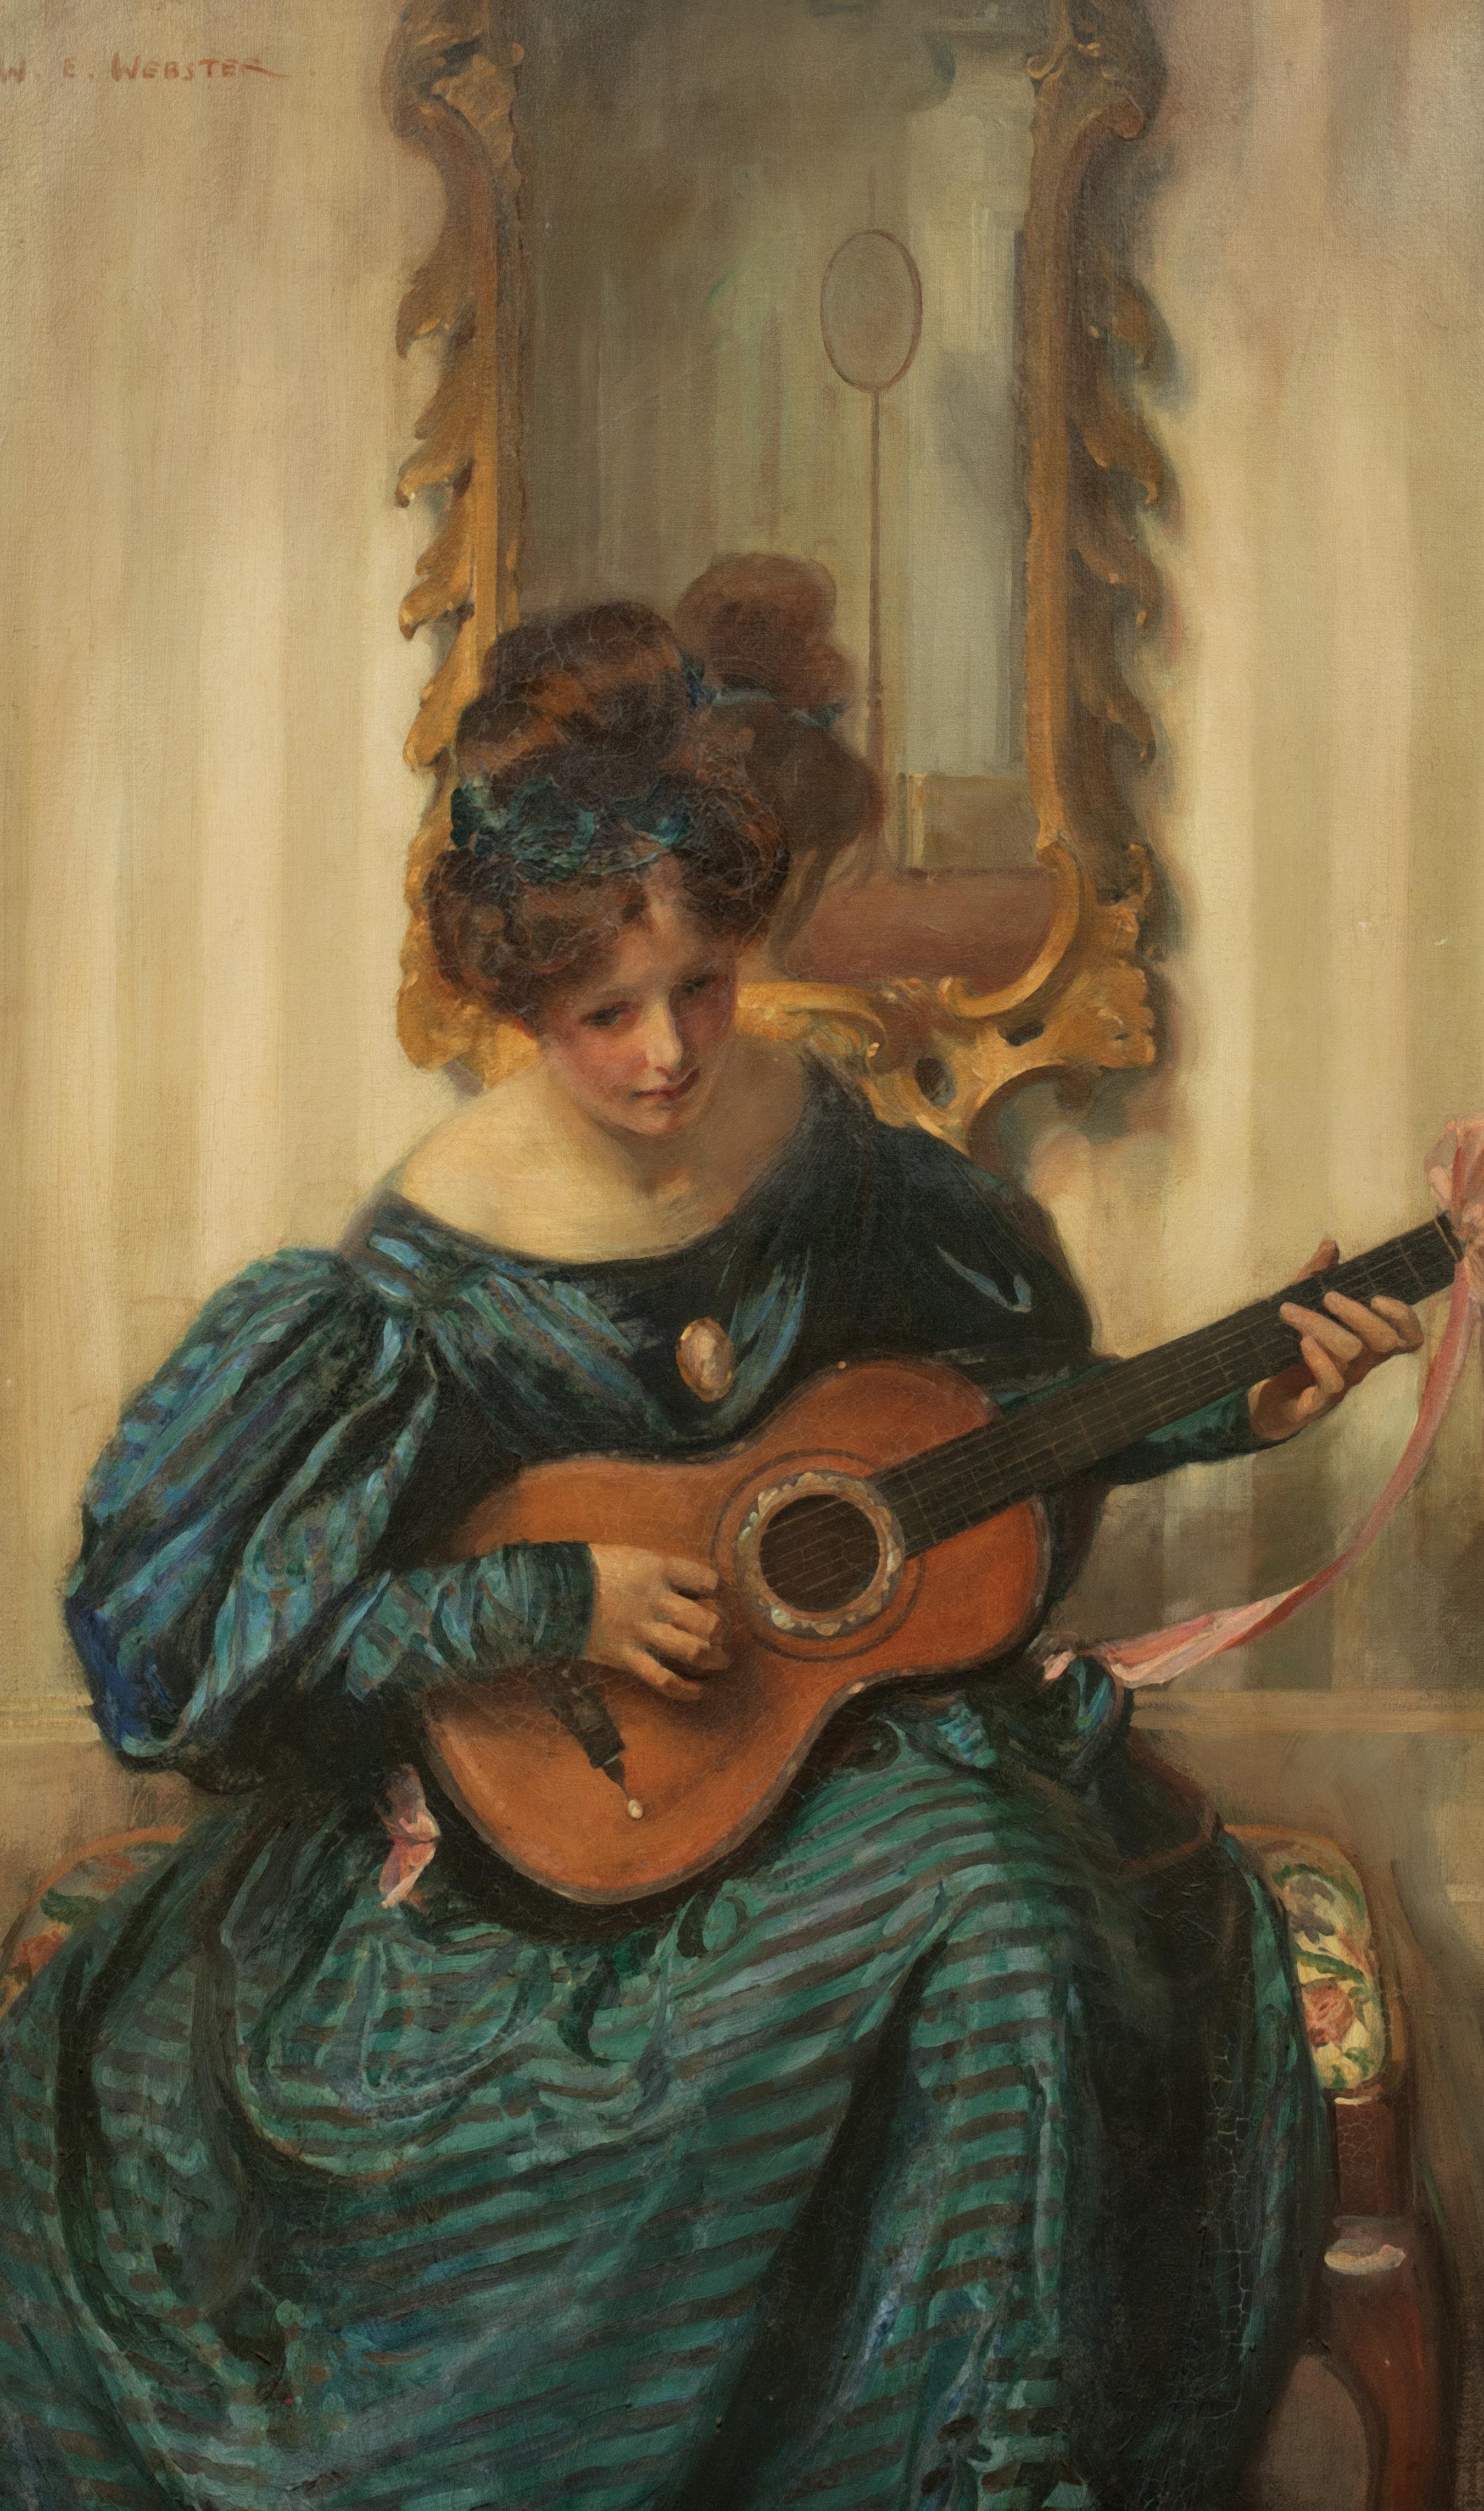 Portrait of a Lady Playing The Guitar, early 20th Century 

by WALTER ERNEST WEBSTER (1877-1959)

Large early 20th Century portrait of a lady playing the guitar, oil on canvas by Walter Ernest Webster. Excellent quality and condition example of the